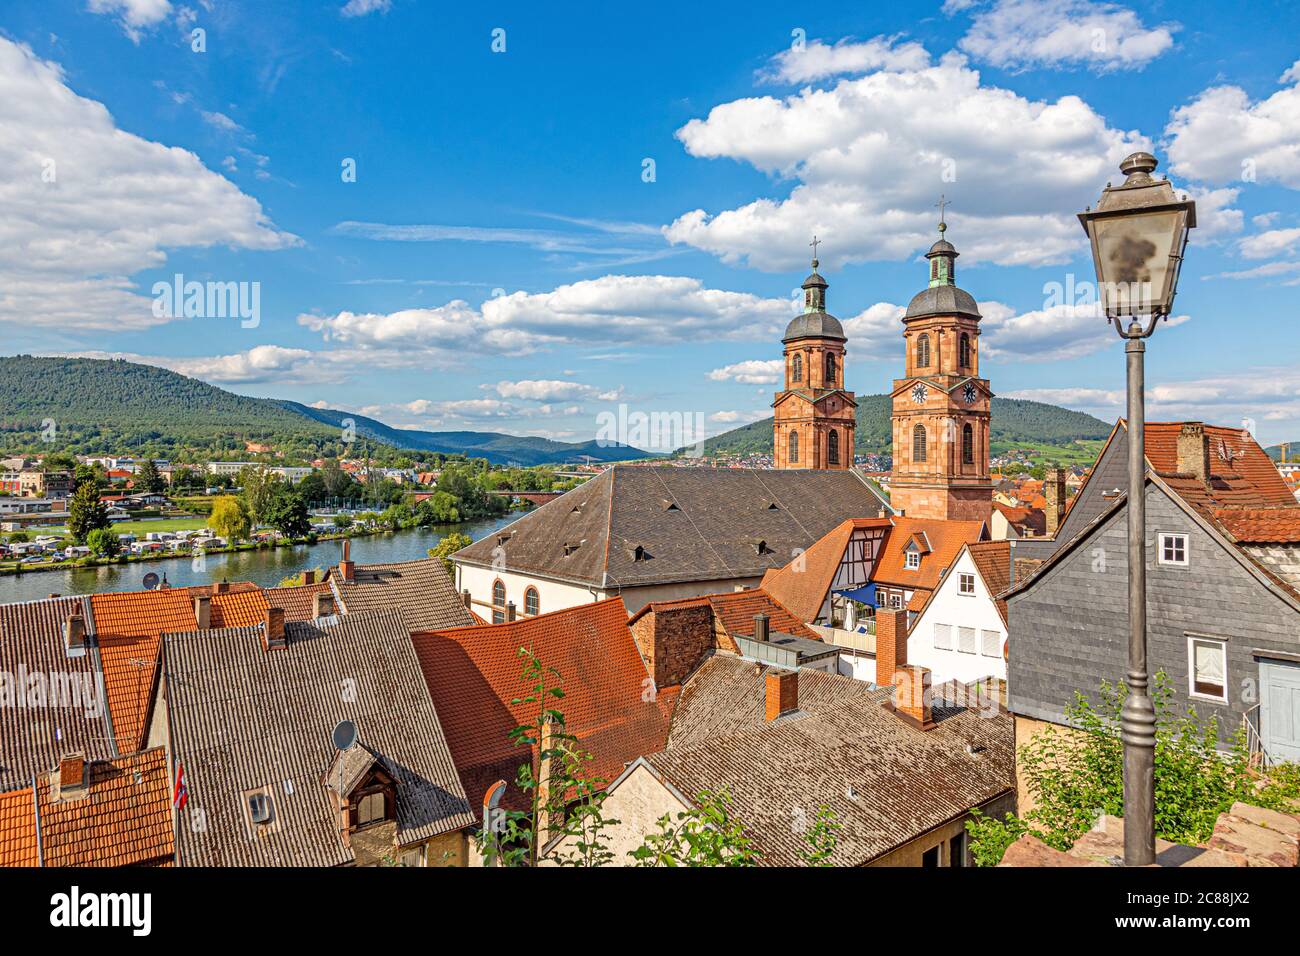 View to St. Jacobus church in the medieval German city of Miltenberg during daytime Stock Photo